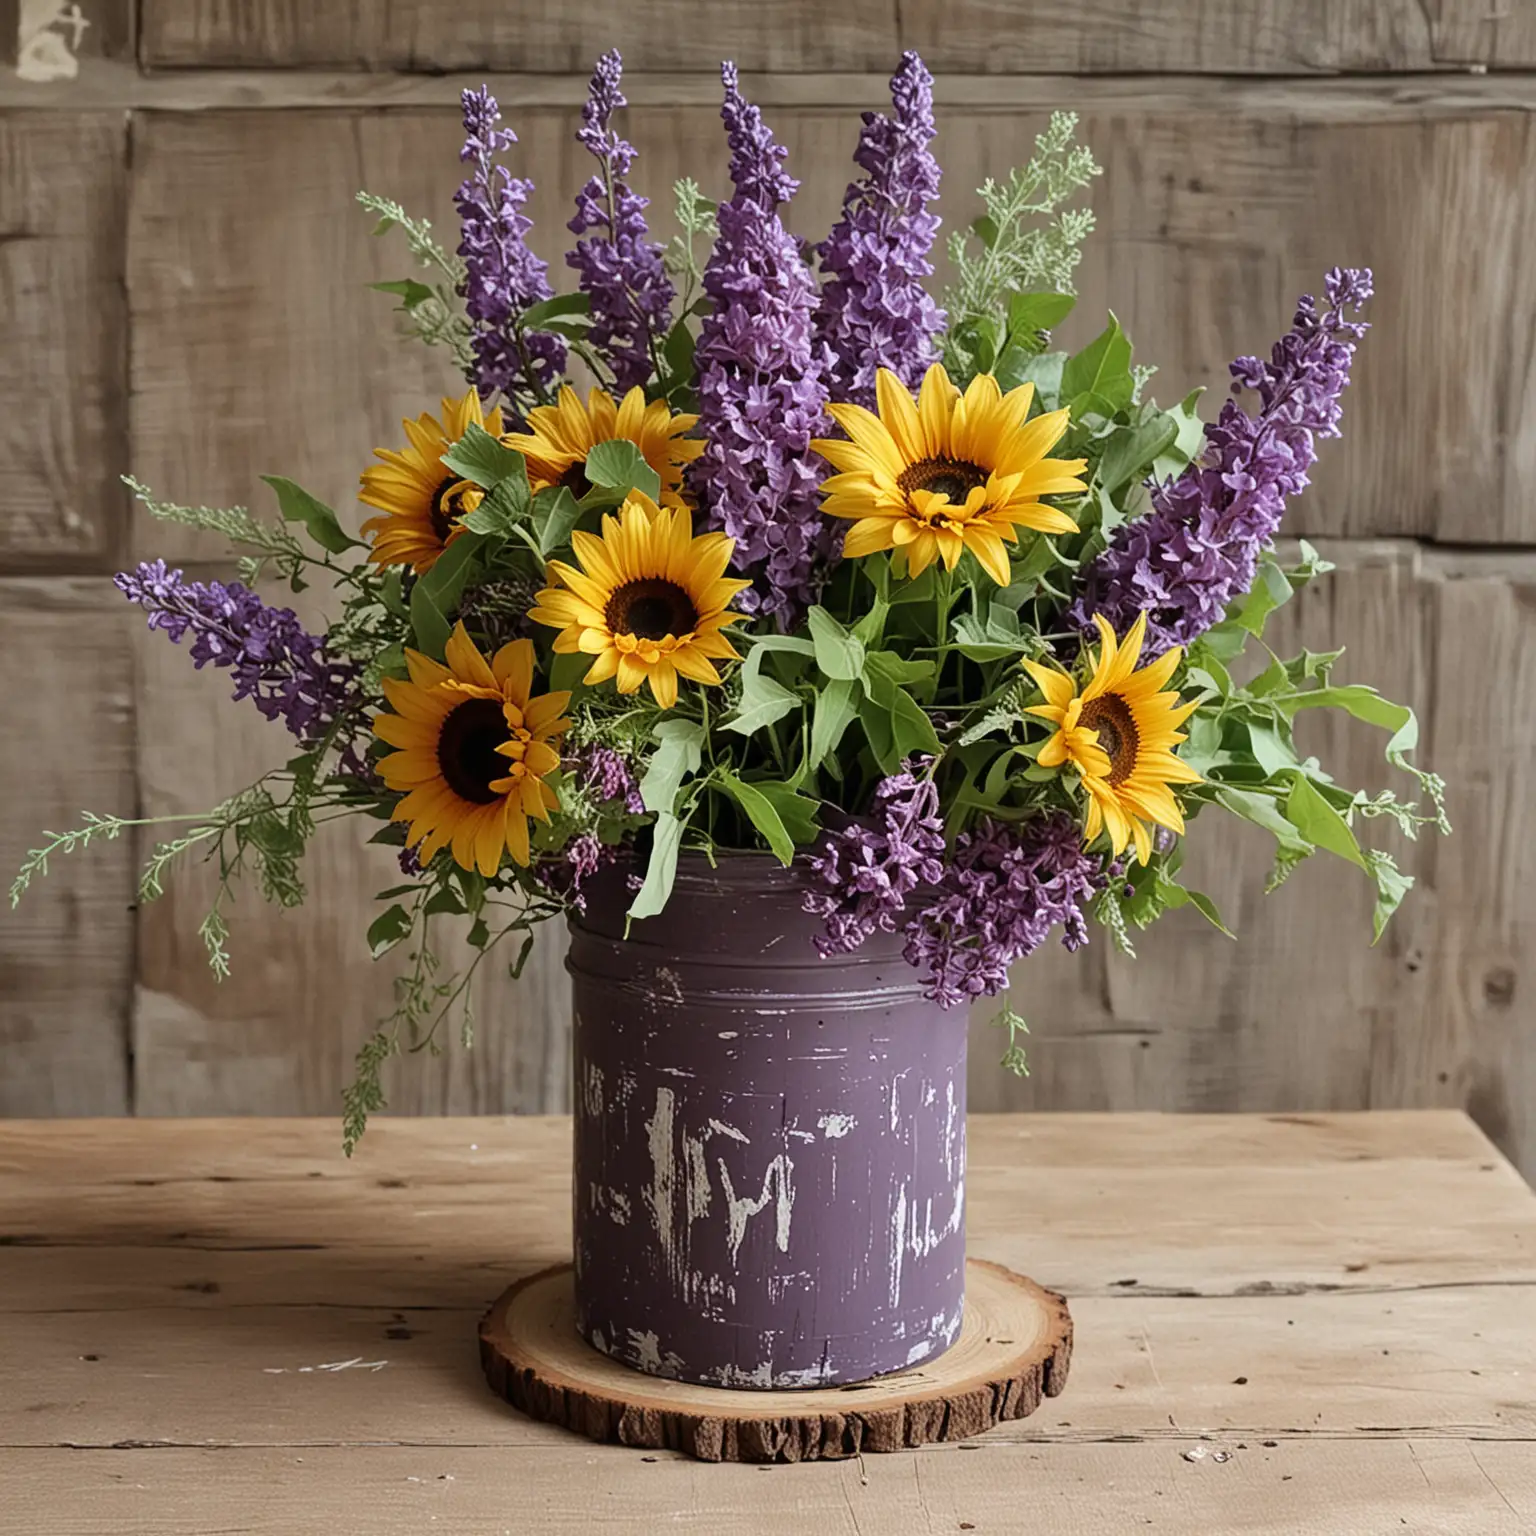 Rustic-Wedding-Centerpiece-Sunflowers-and-Lilacs-in-Distressed-Purple-Vase